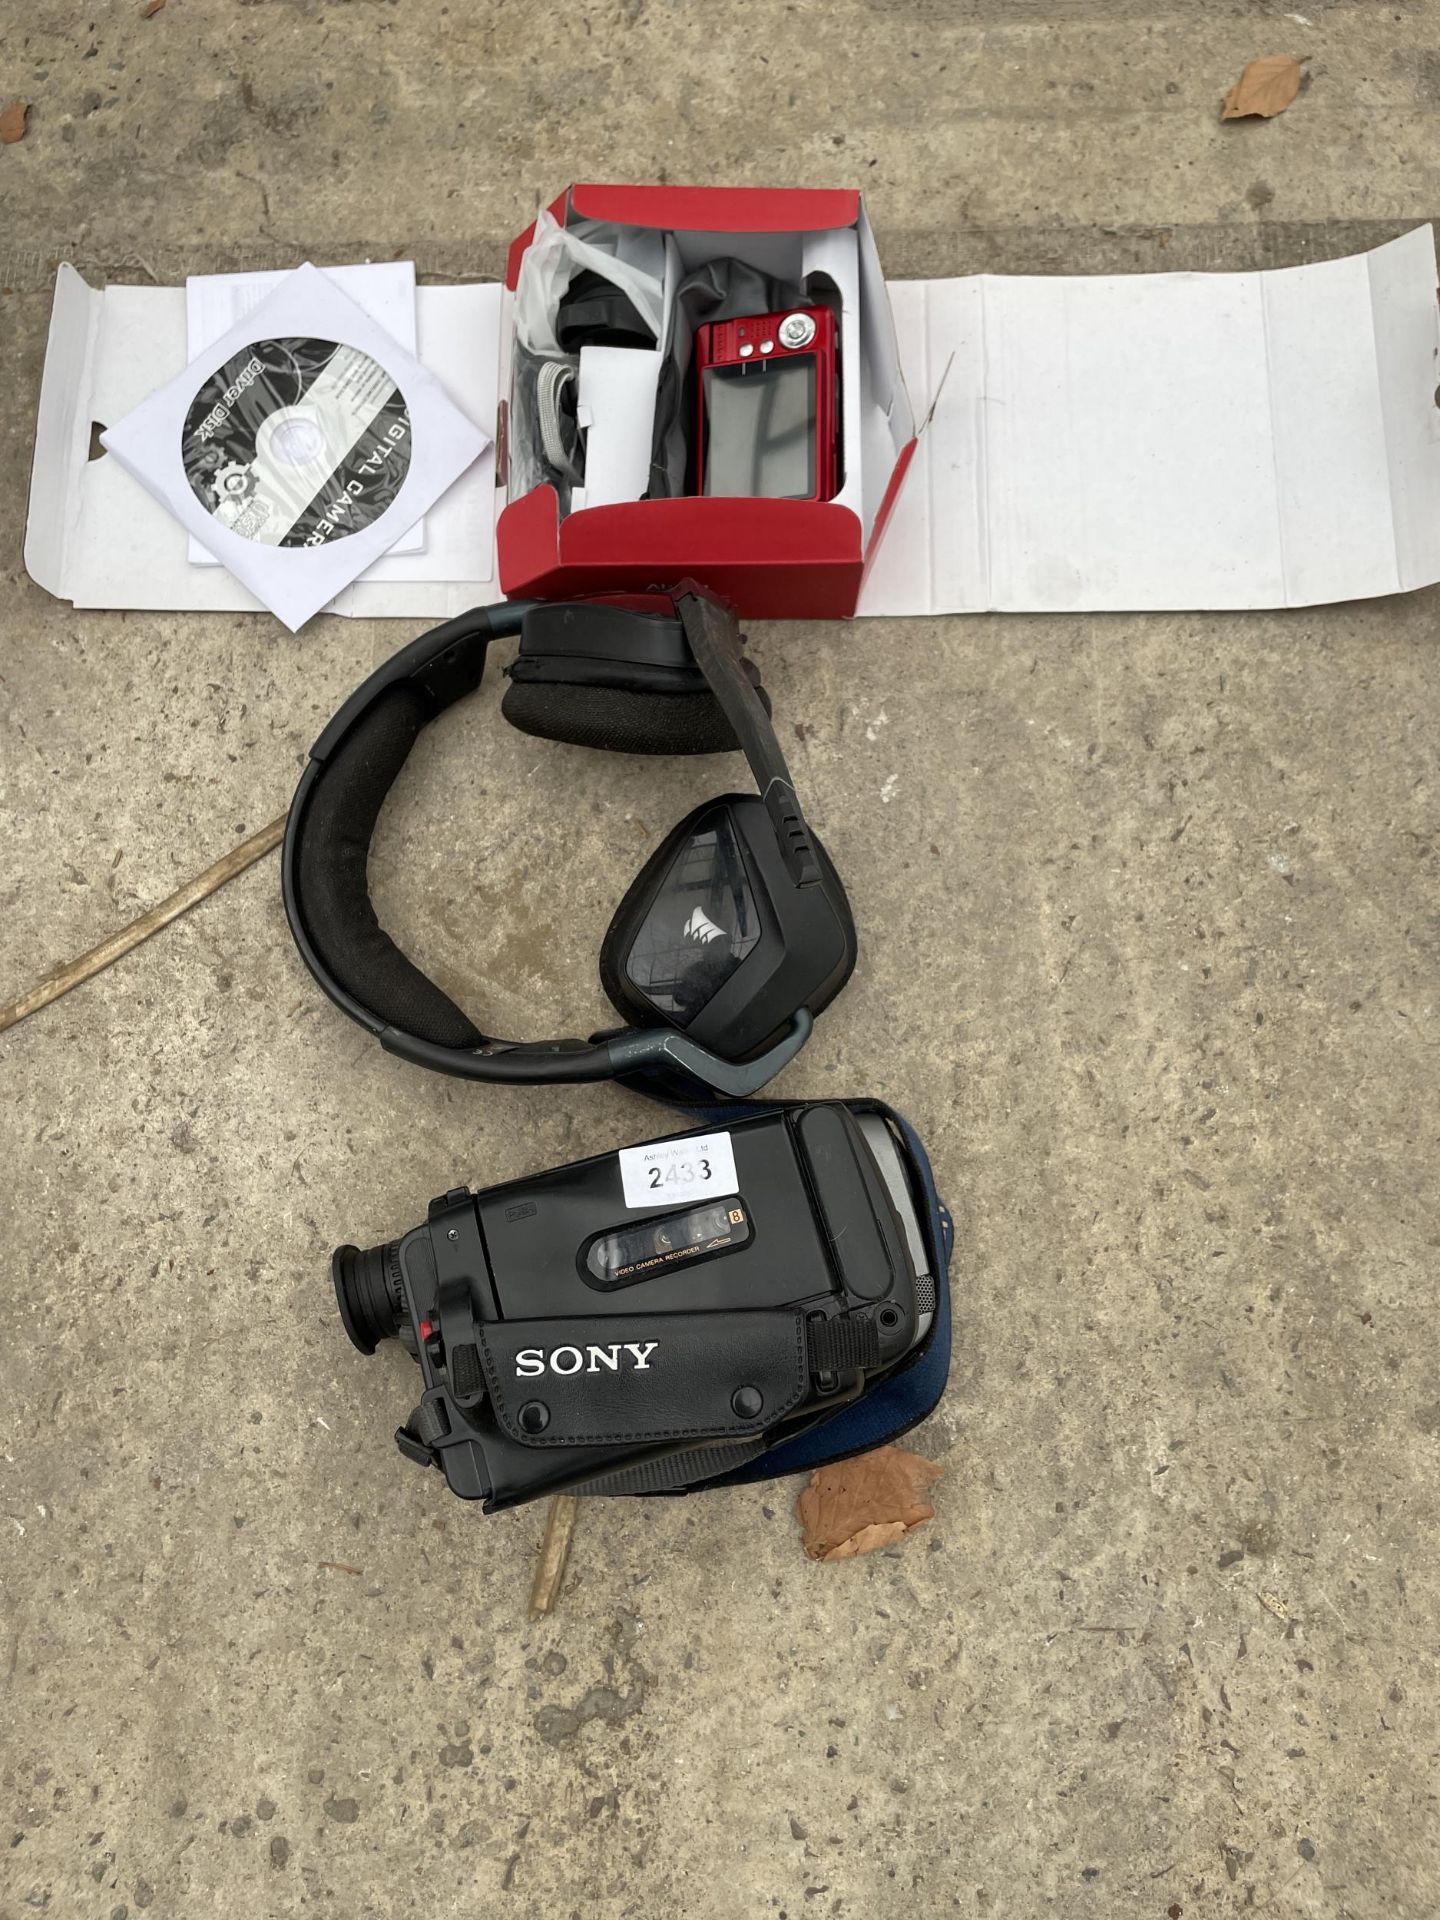 A SONY CAMCORDER, A HEADSET AND A DIGITAL CAMERA